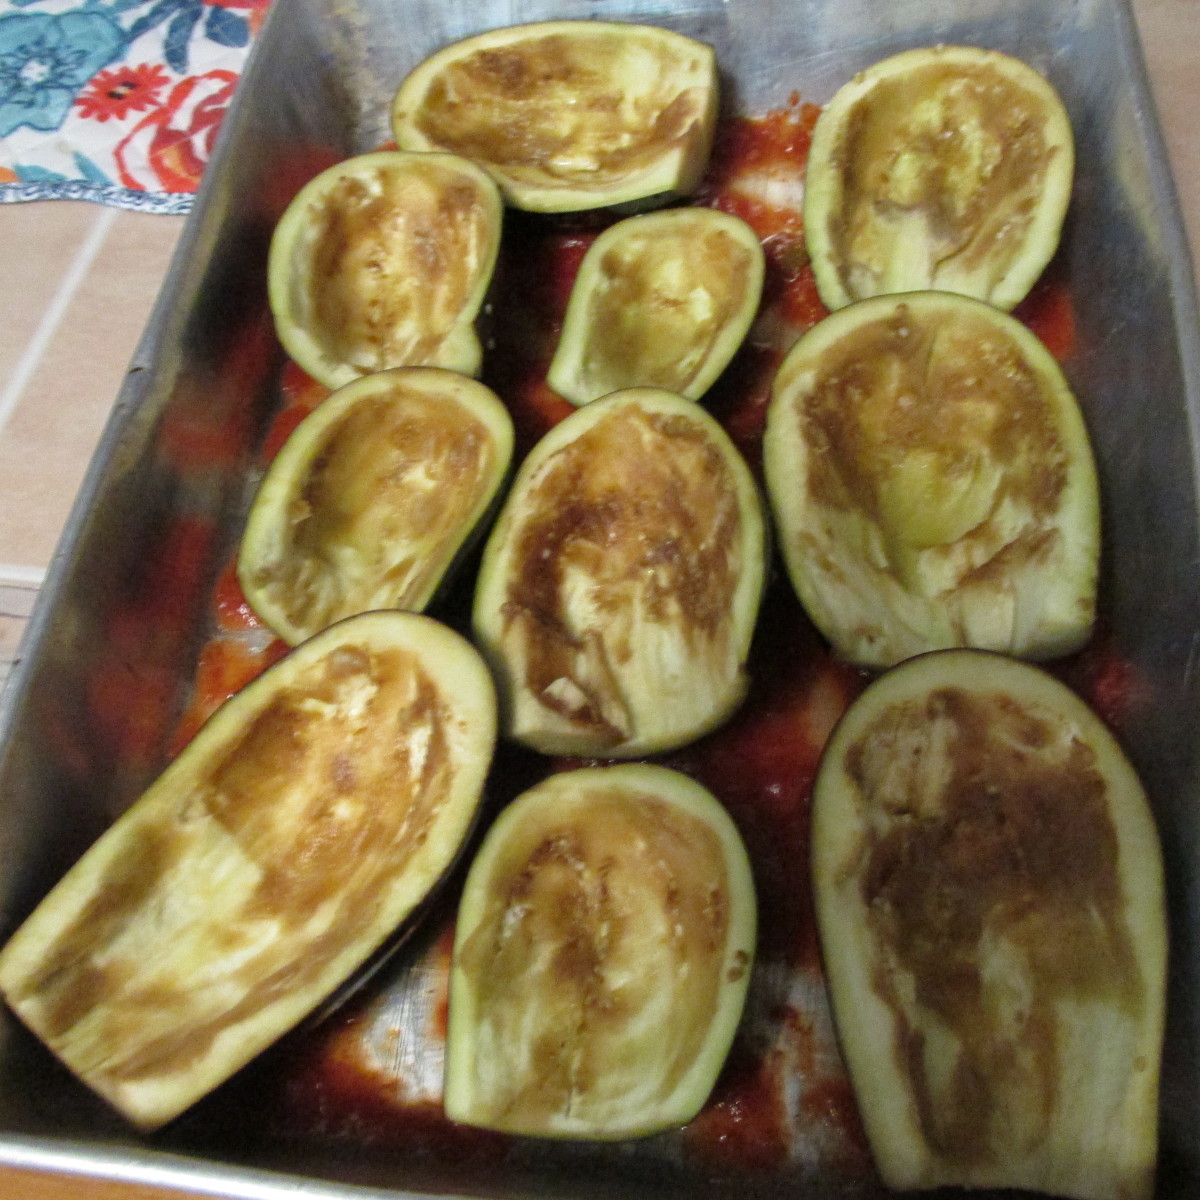 Eggplant shells after salted, rinsed, and dried